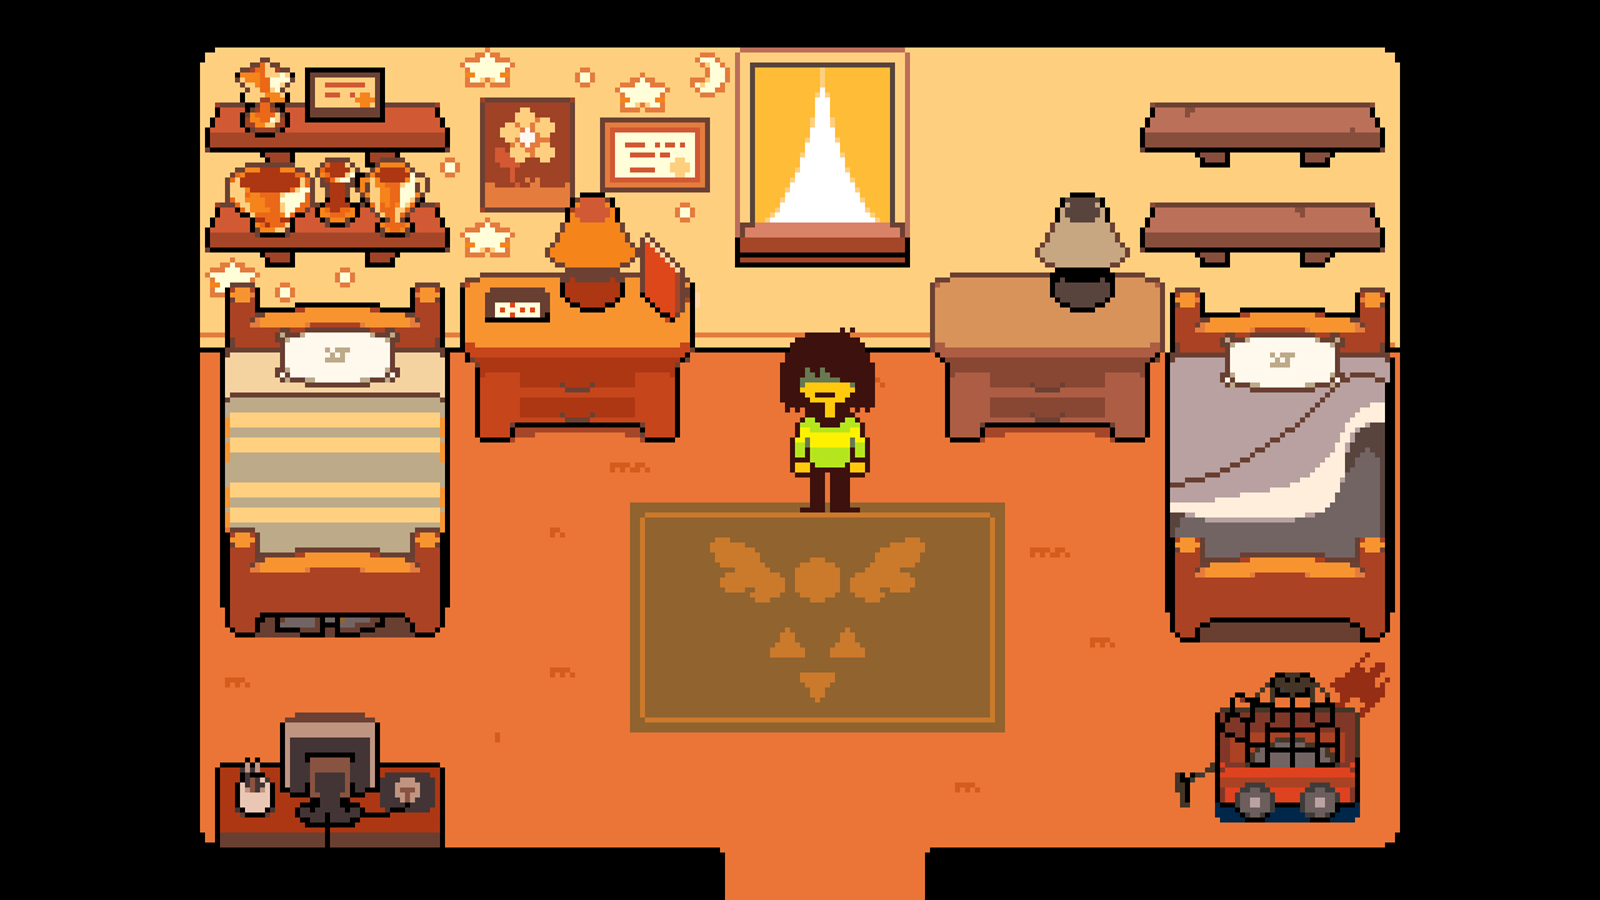 Deltarune isn't in the Undertale world, will take a while to